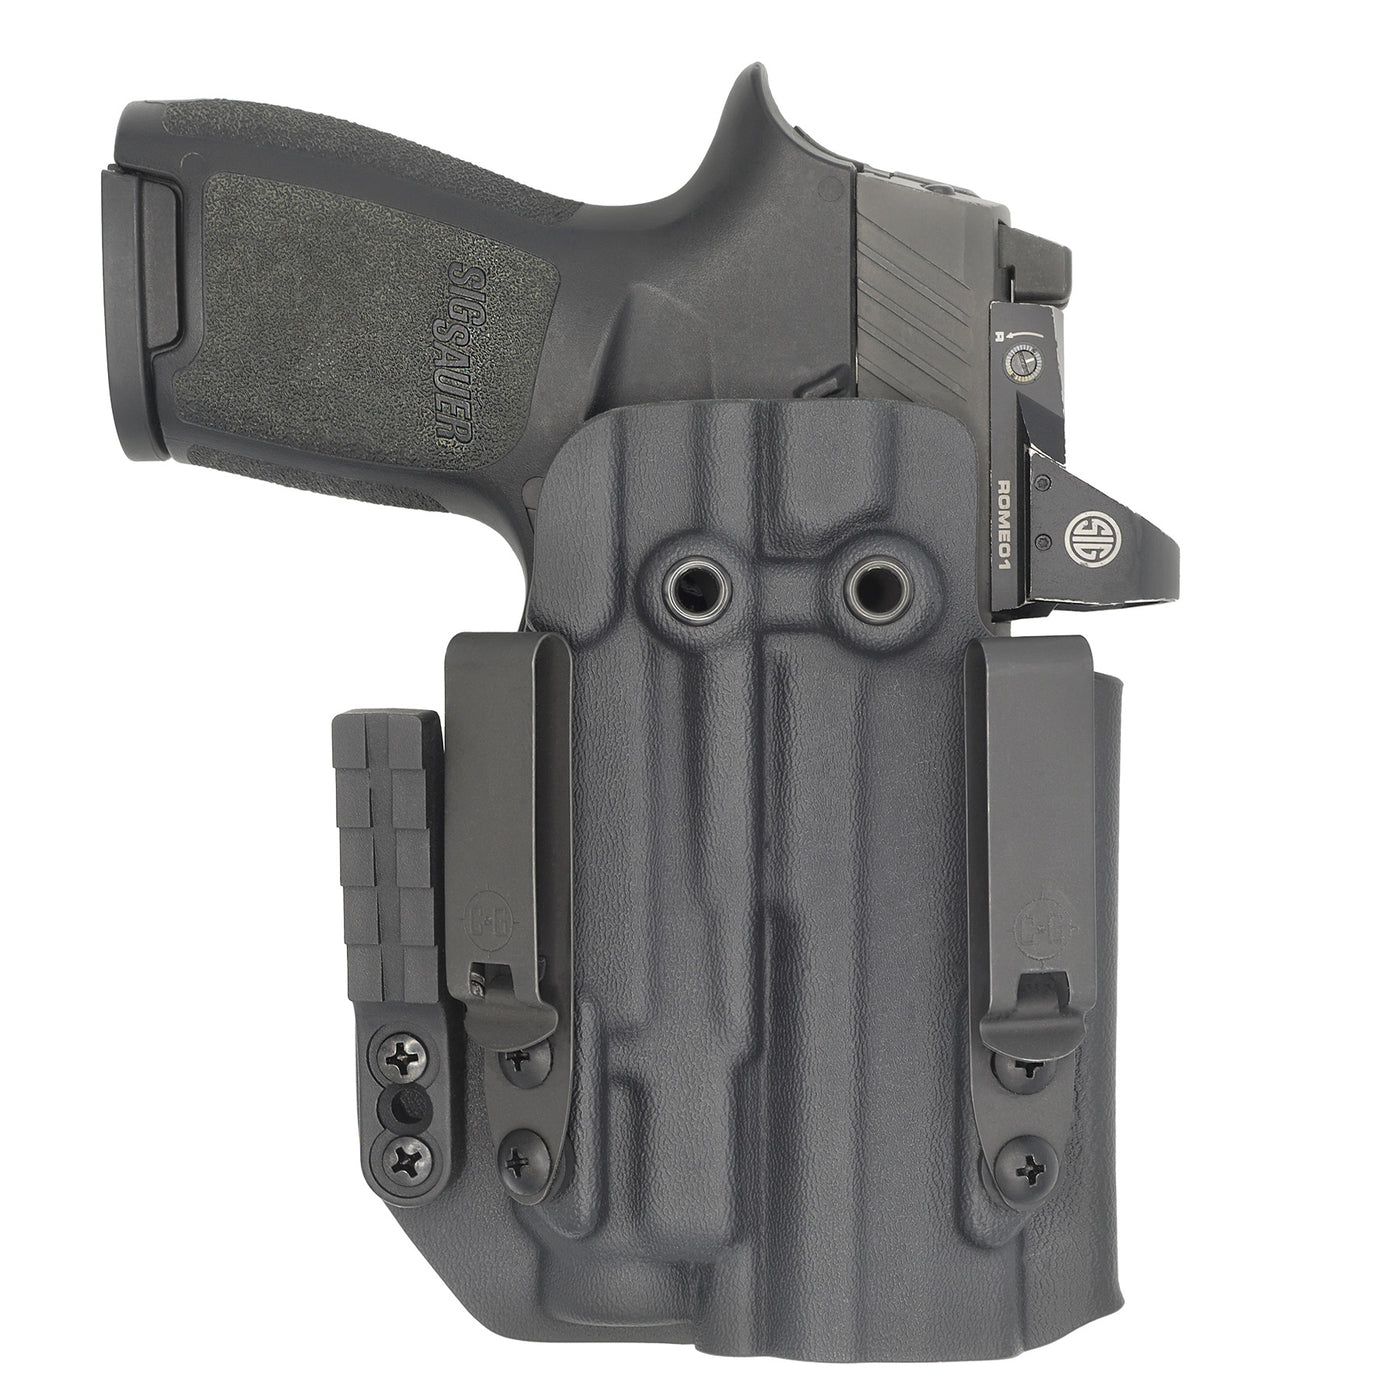 C&G Holsters Quickship IWB ALPHA UPGRADE Tactical Sig P320/c Streamlight TLR7/a in holstered position